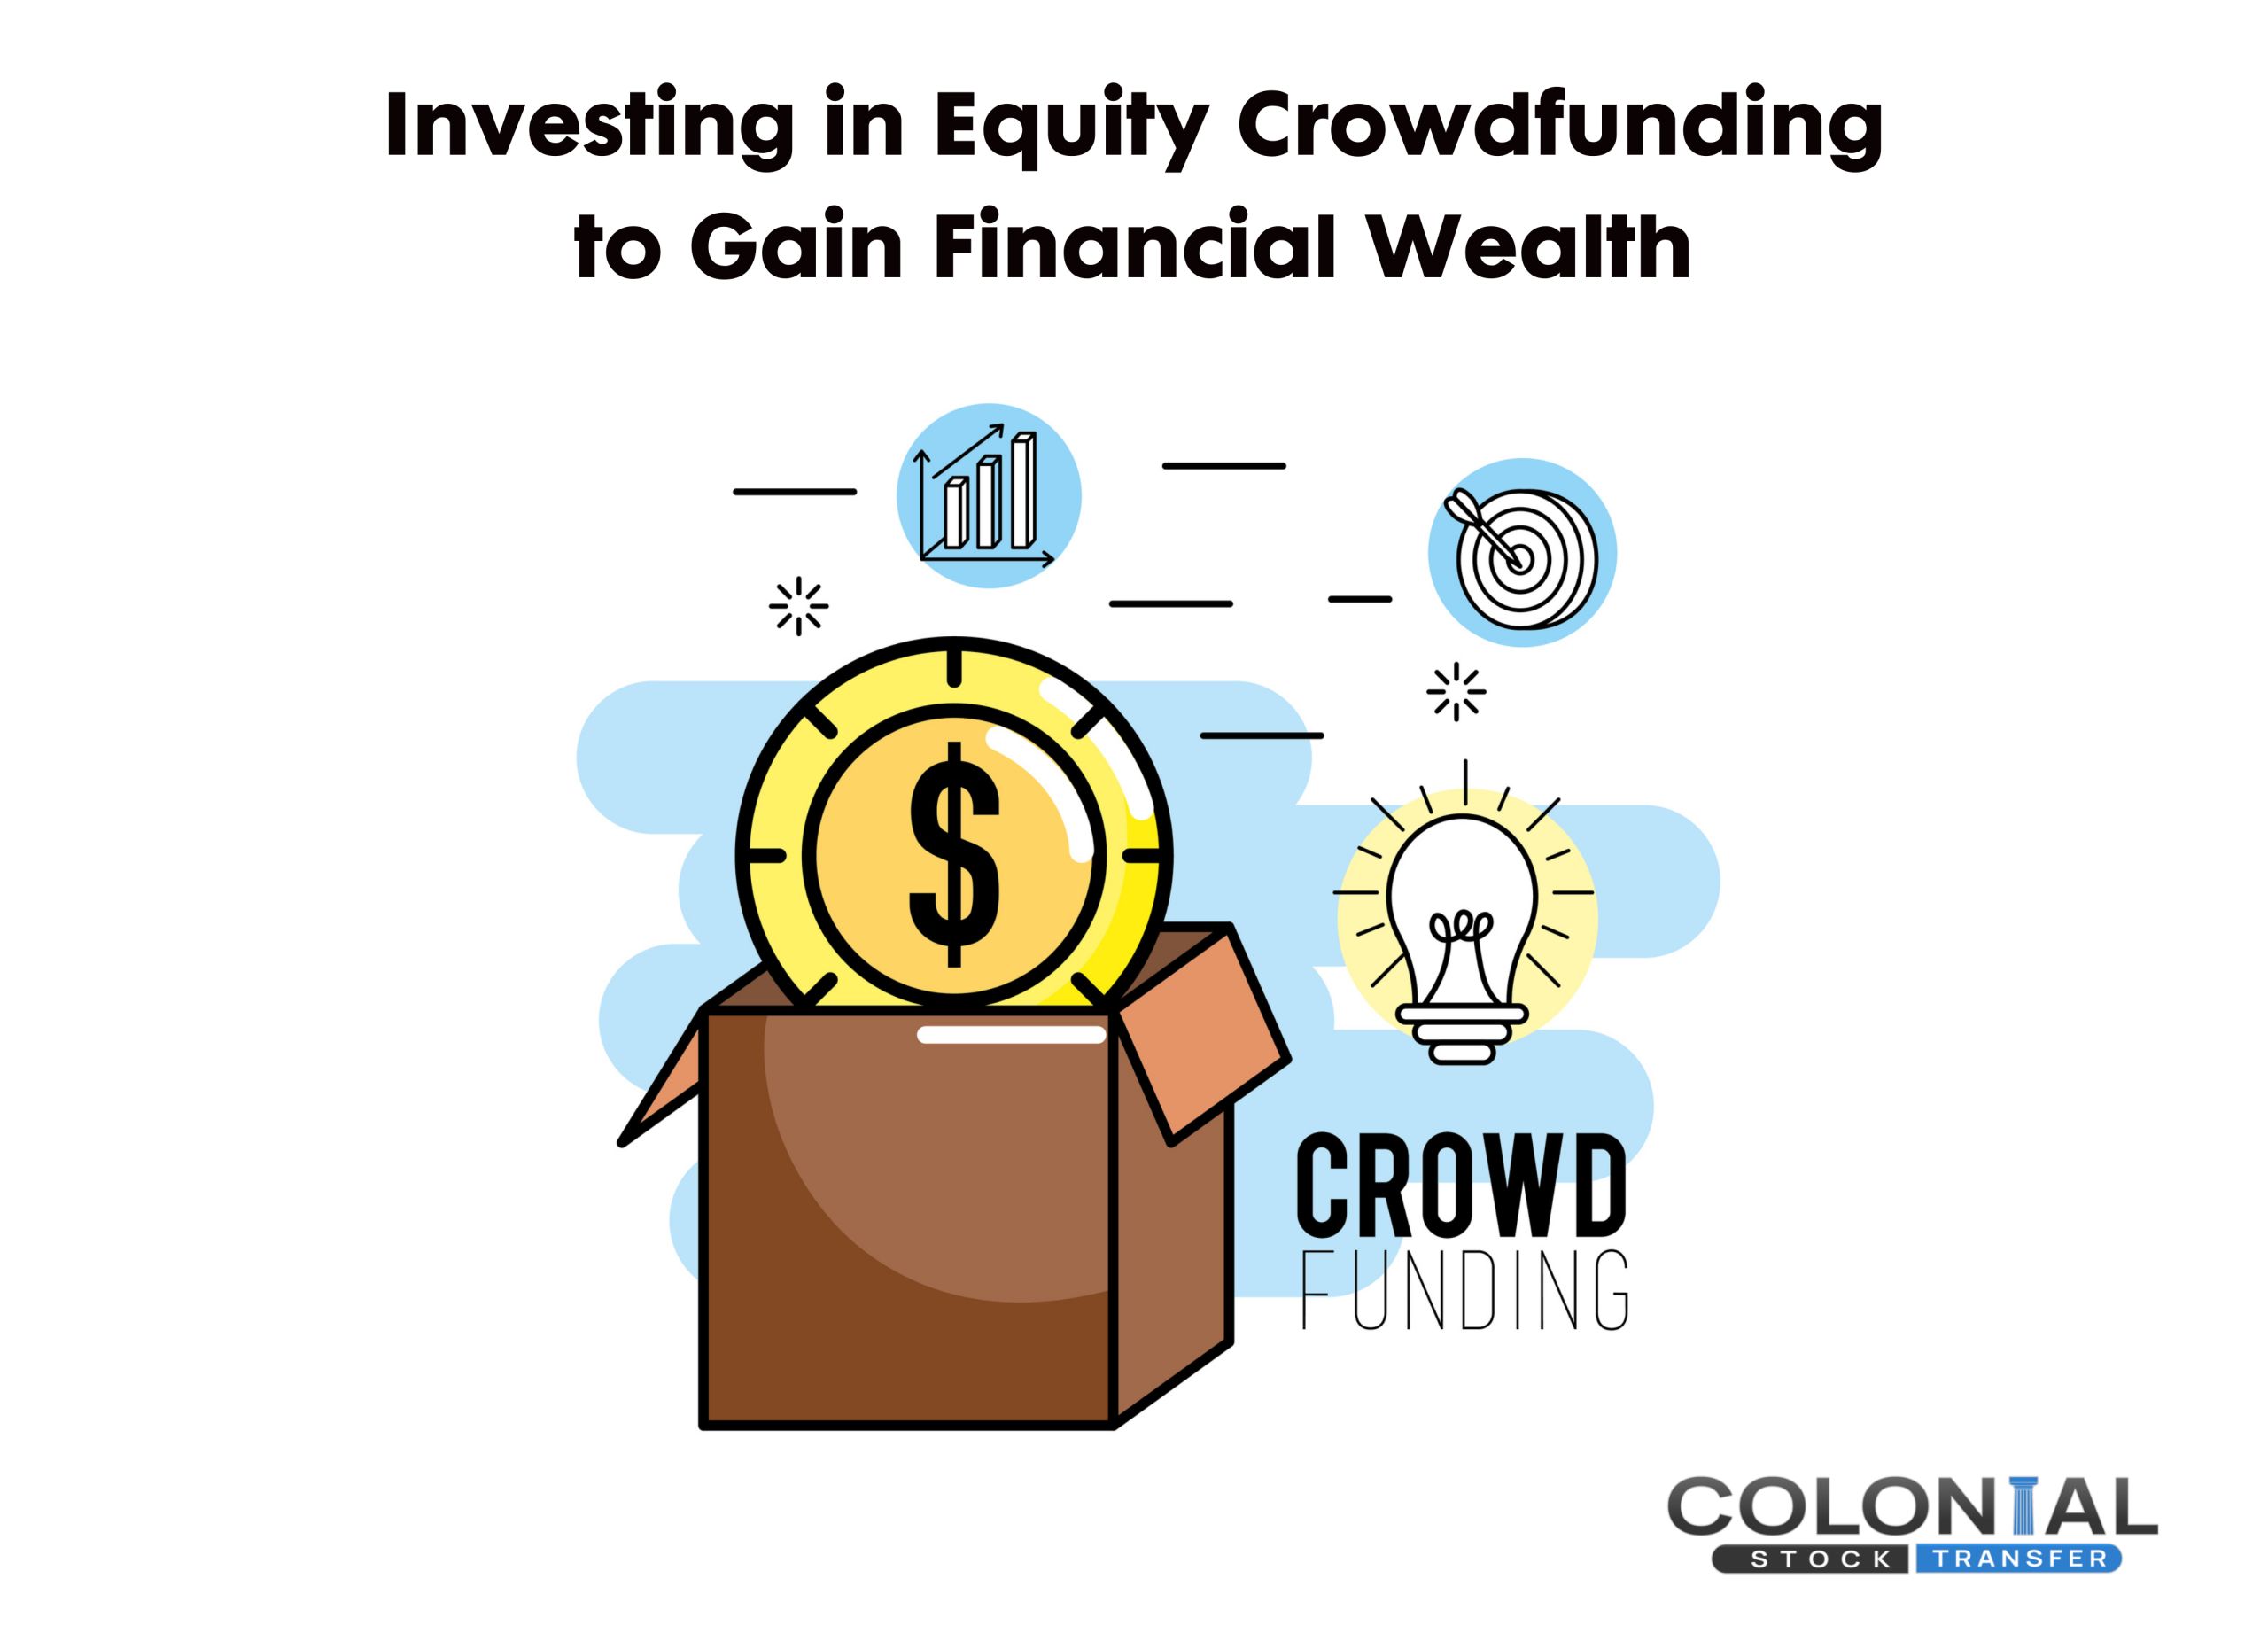 Investing in Equity Crowdfunding to Gain Financial Wealth